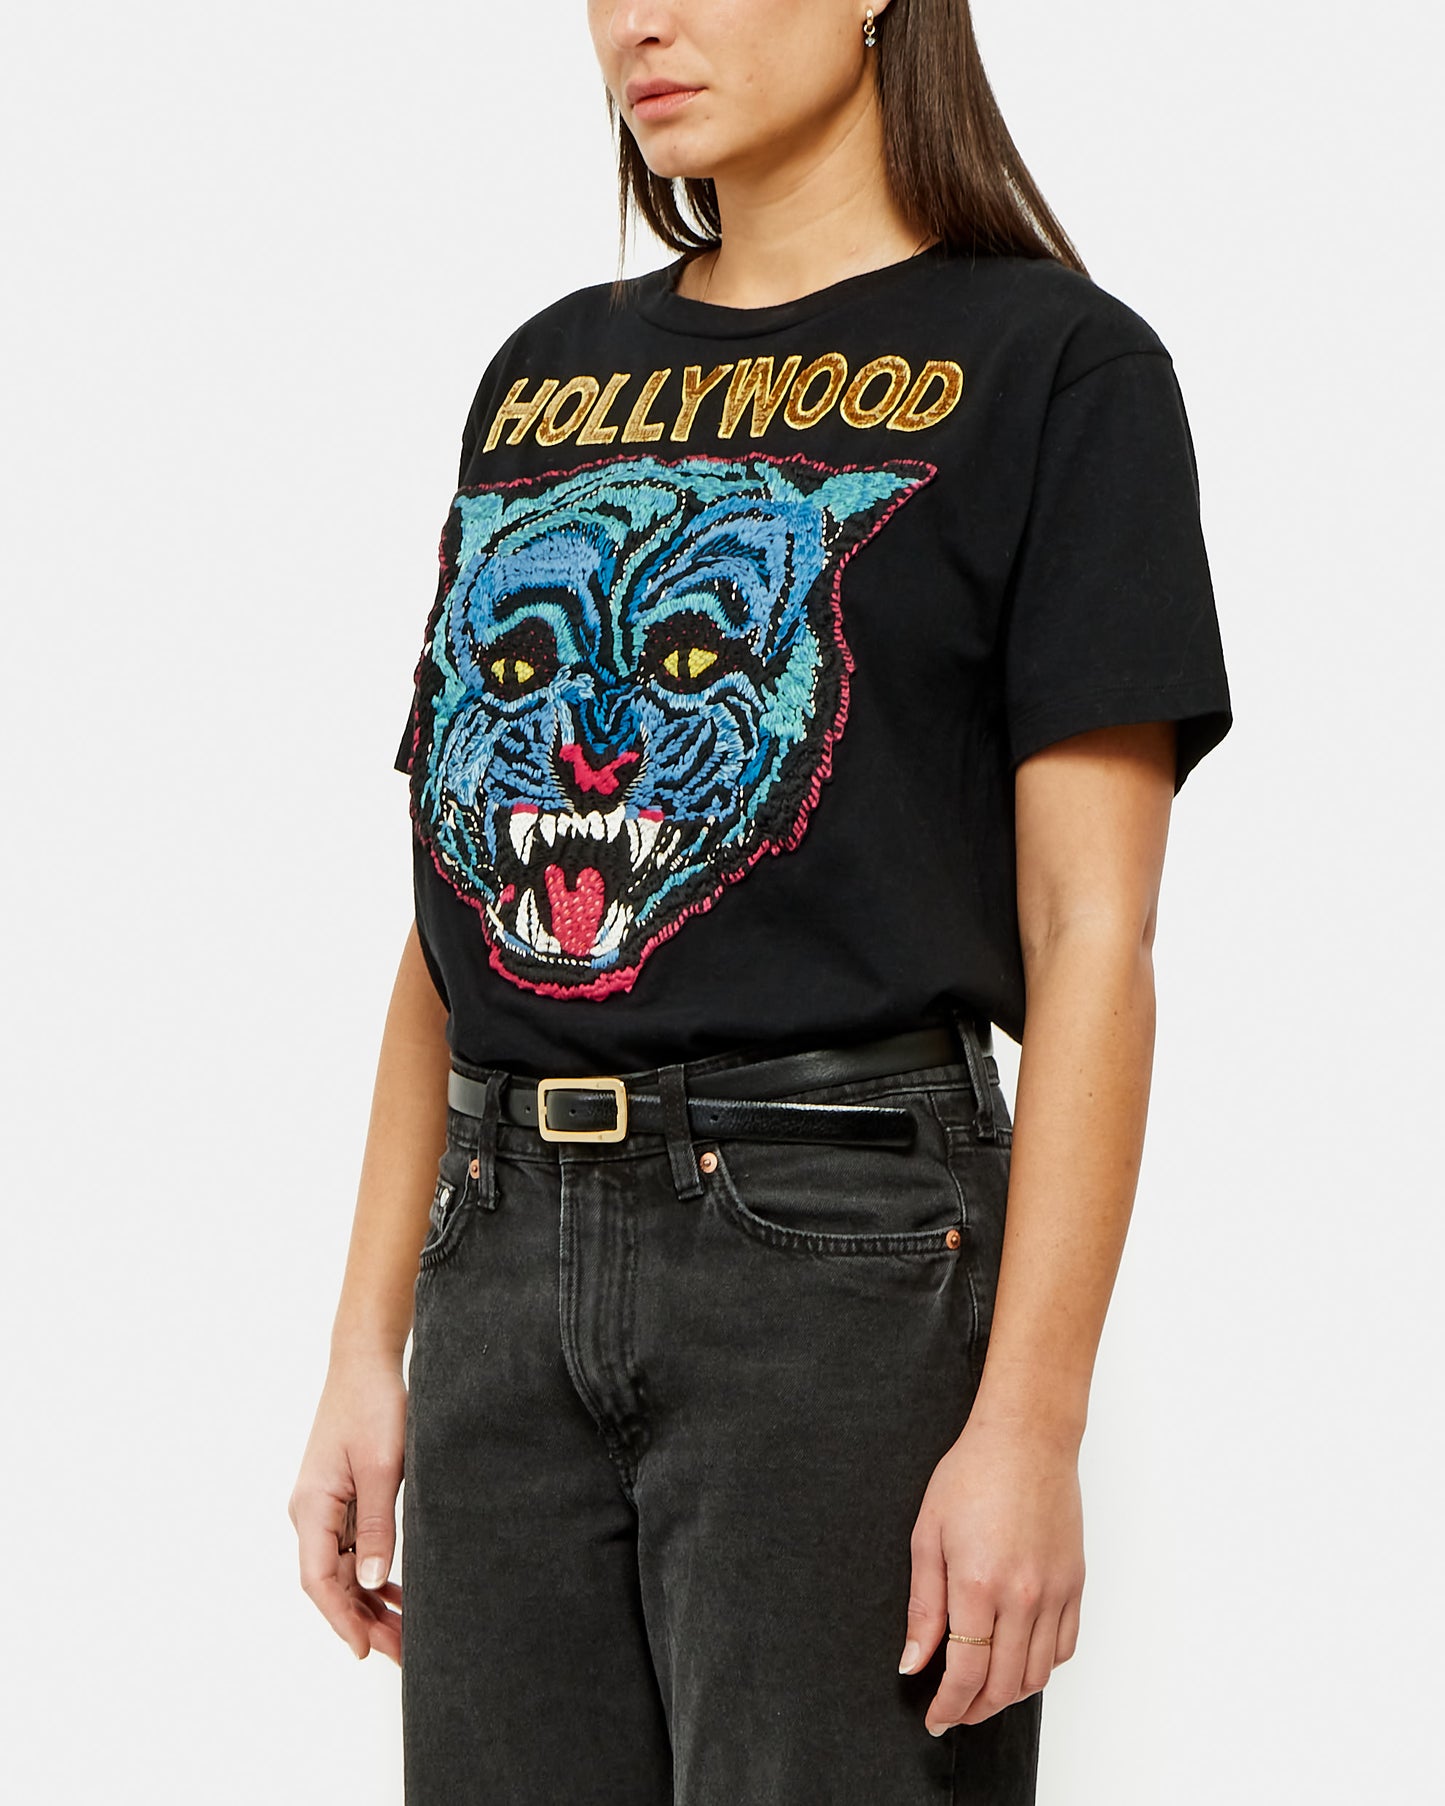 Gucci Black Sequin Gold Hollywood T-Shirt - XS